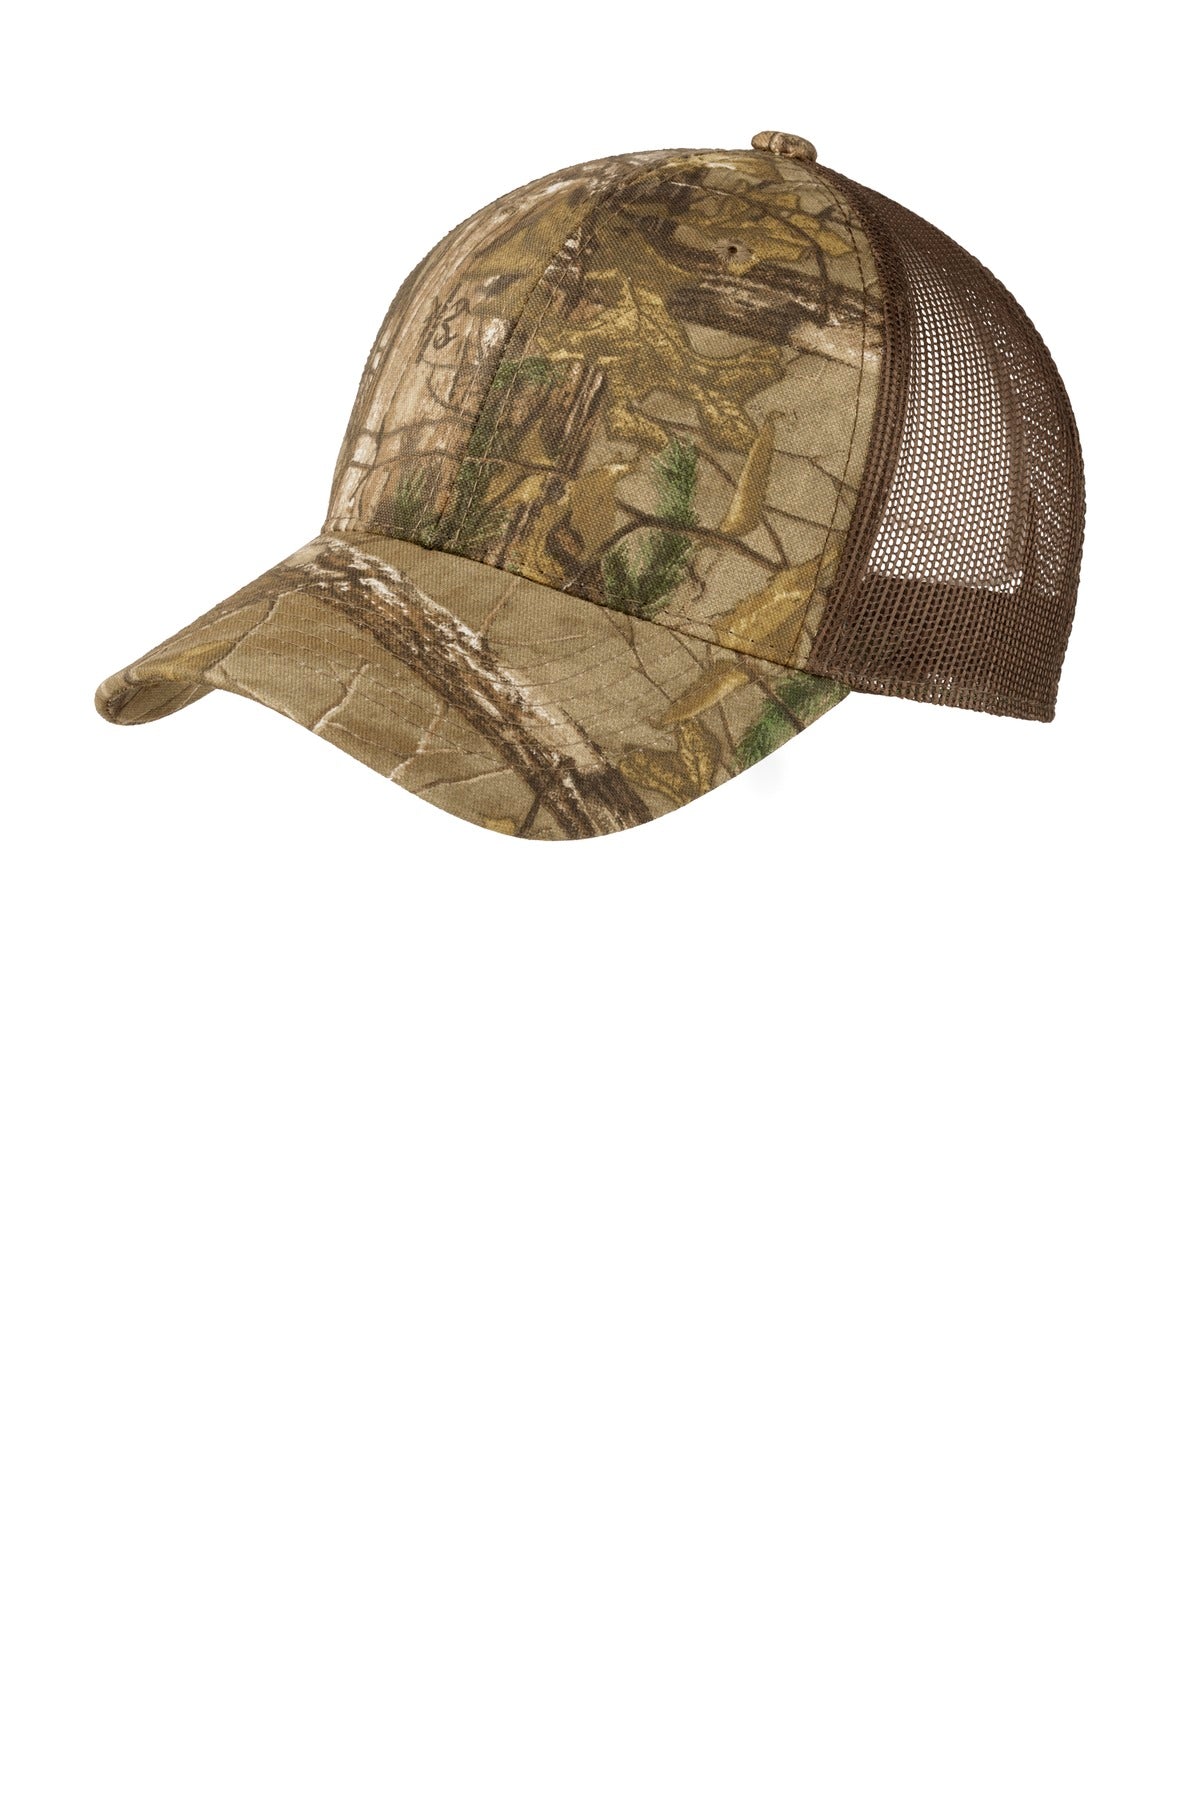 Port Authority Structured Camouflage Mesh Back Cap. C930